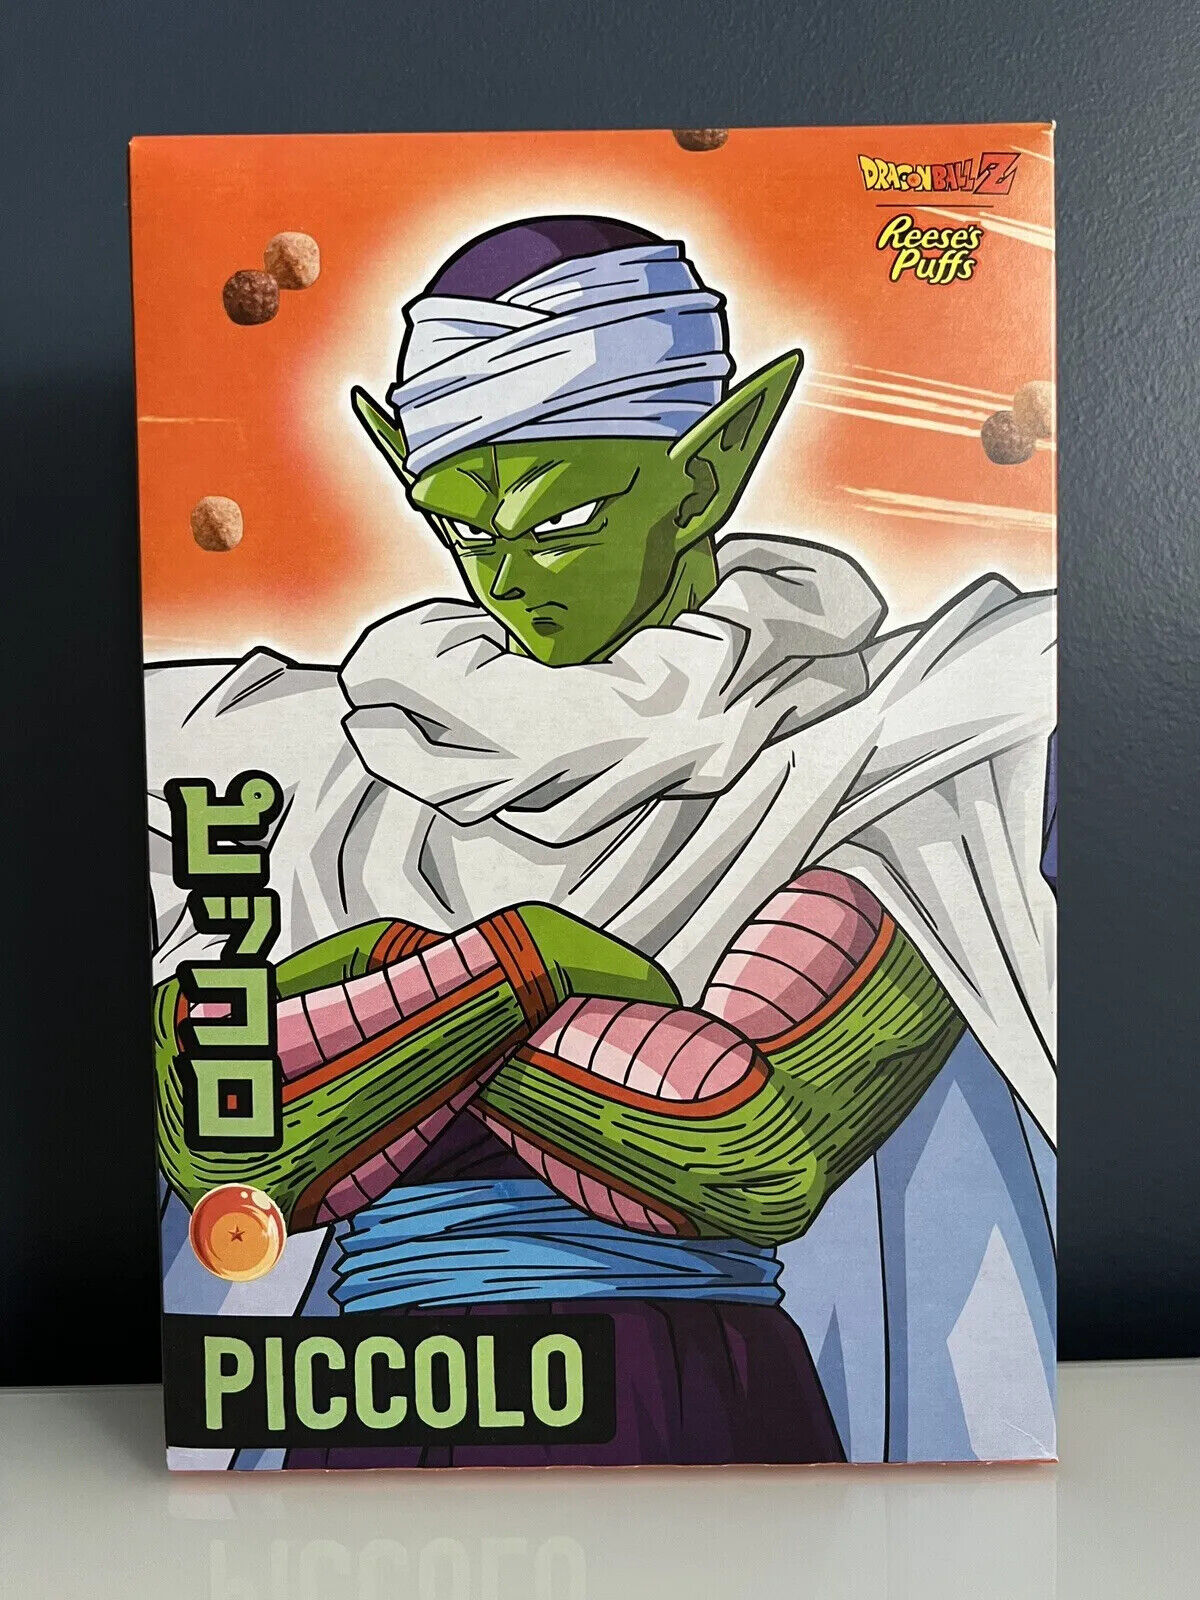 🚨New Limited Edition Pick One REESES PUFFS DRAGONBALL Z Cereal Variety Box